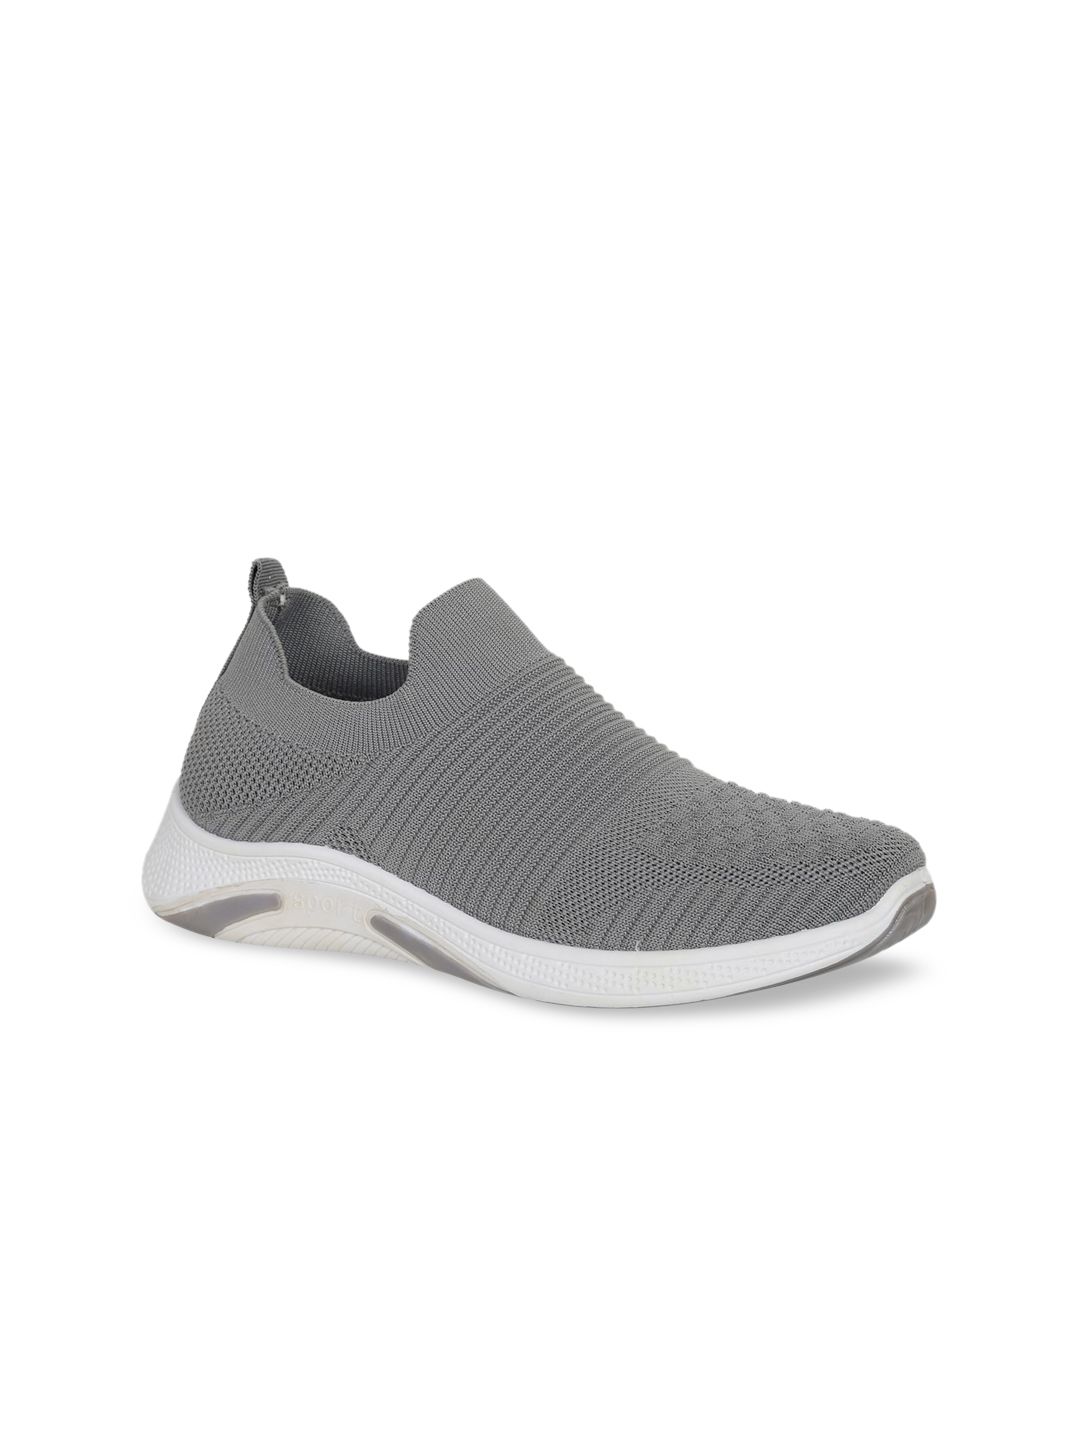 WOMENS BERRY Women Grey Woven Design Slip-On Sneakers Price in India